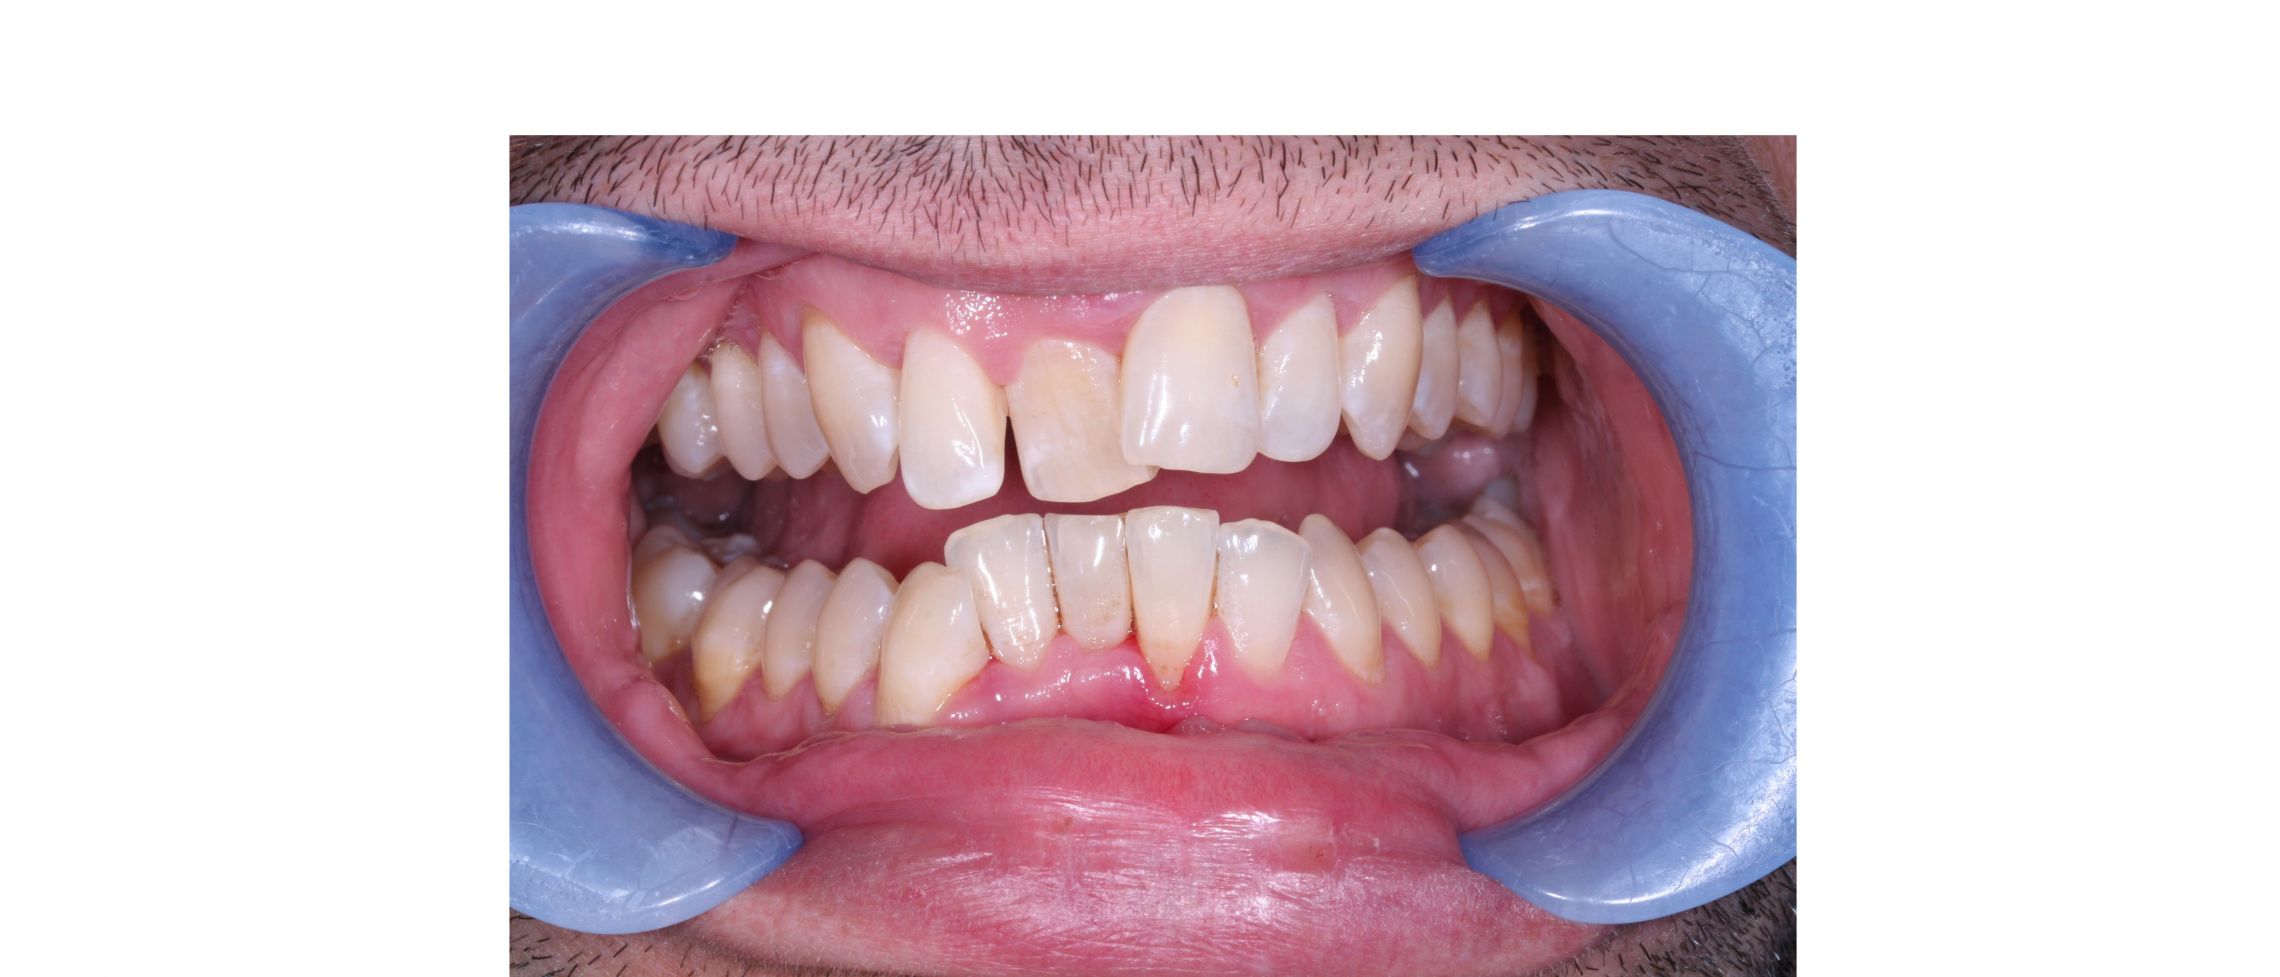 case6 - before treatment